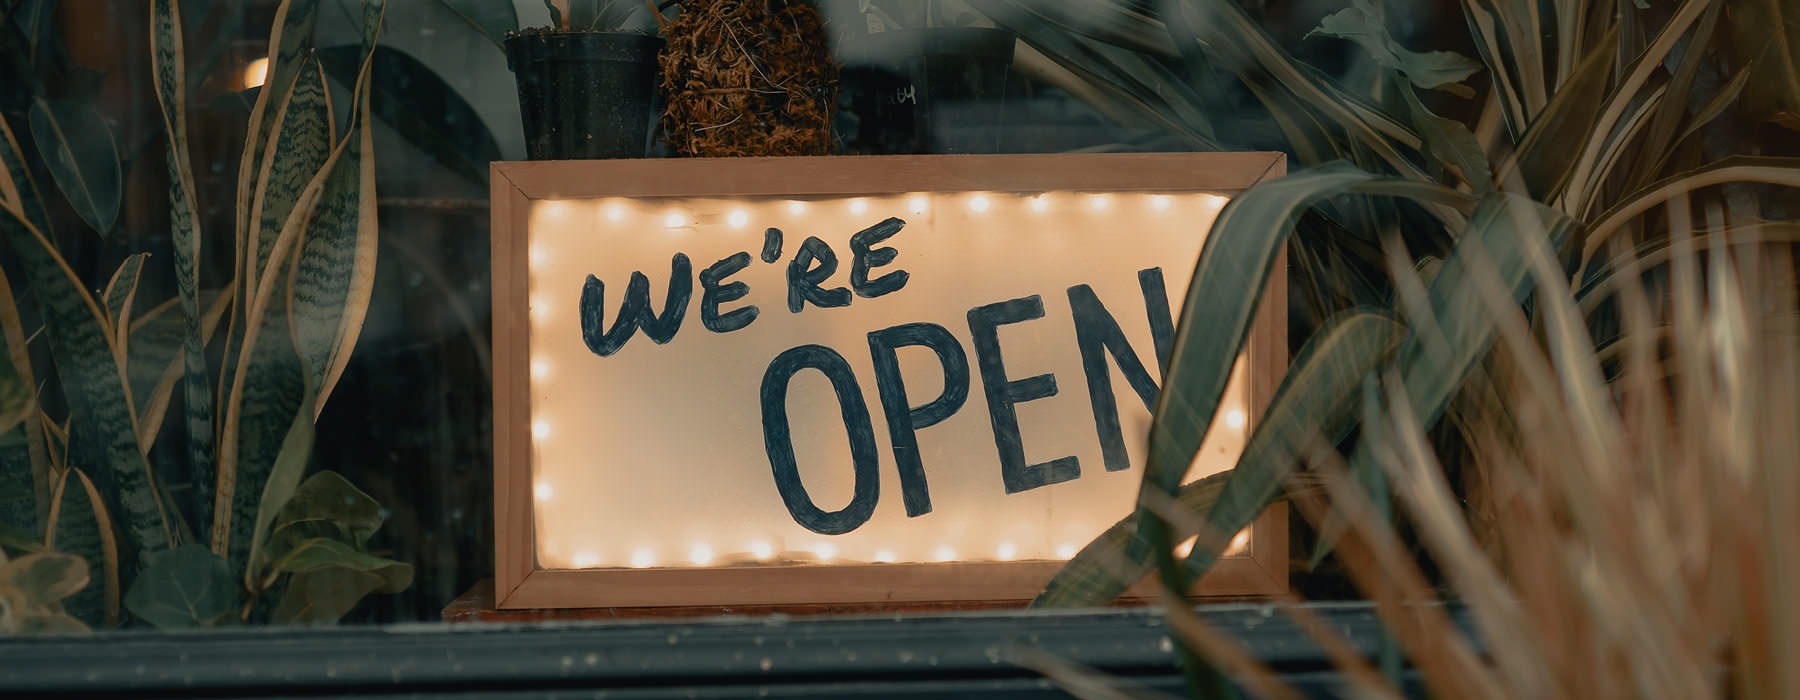 "We're Open" sign surrounded by foliage